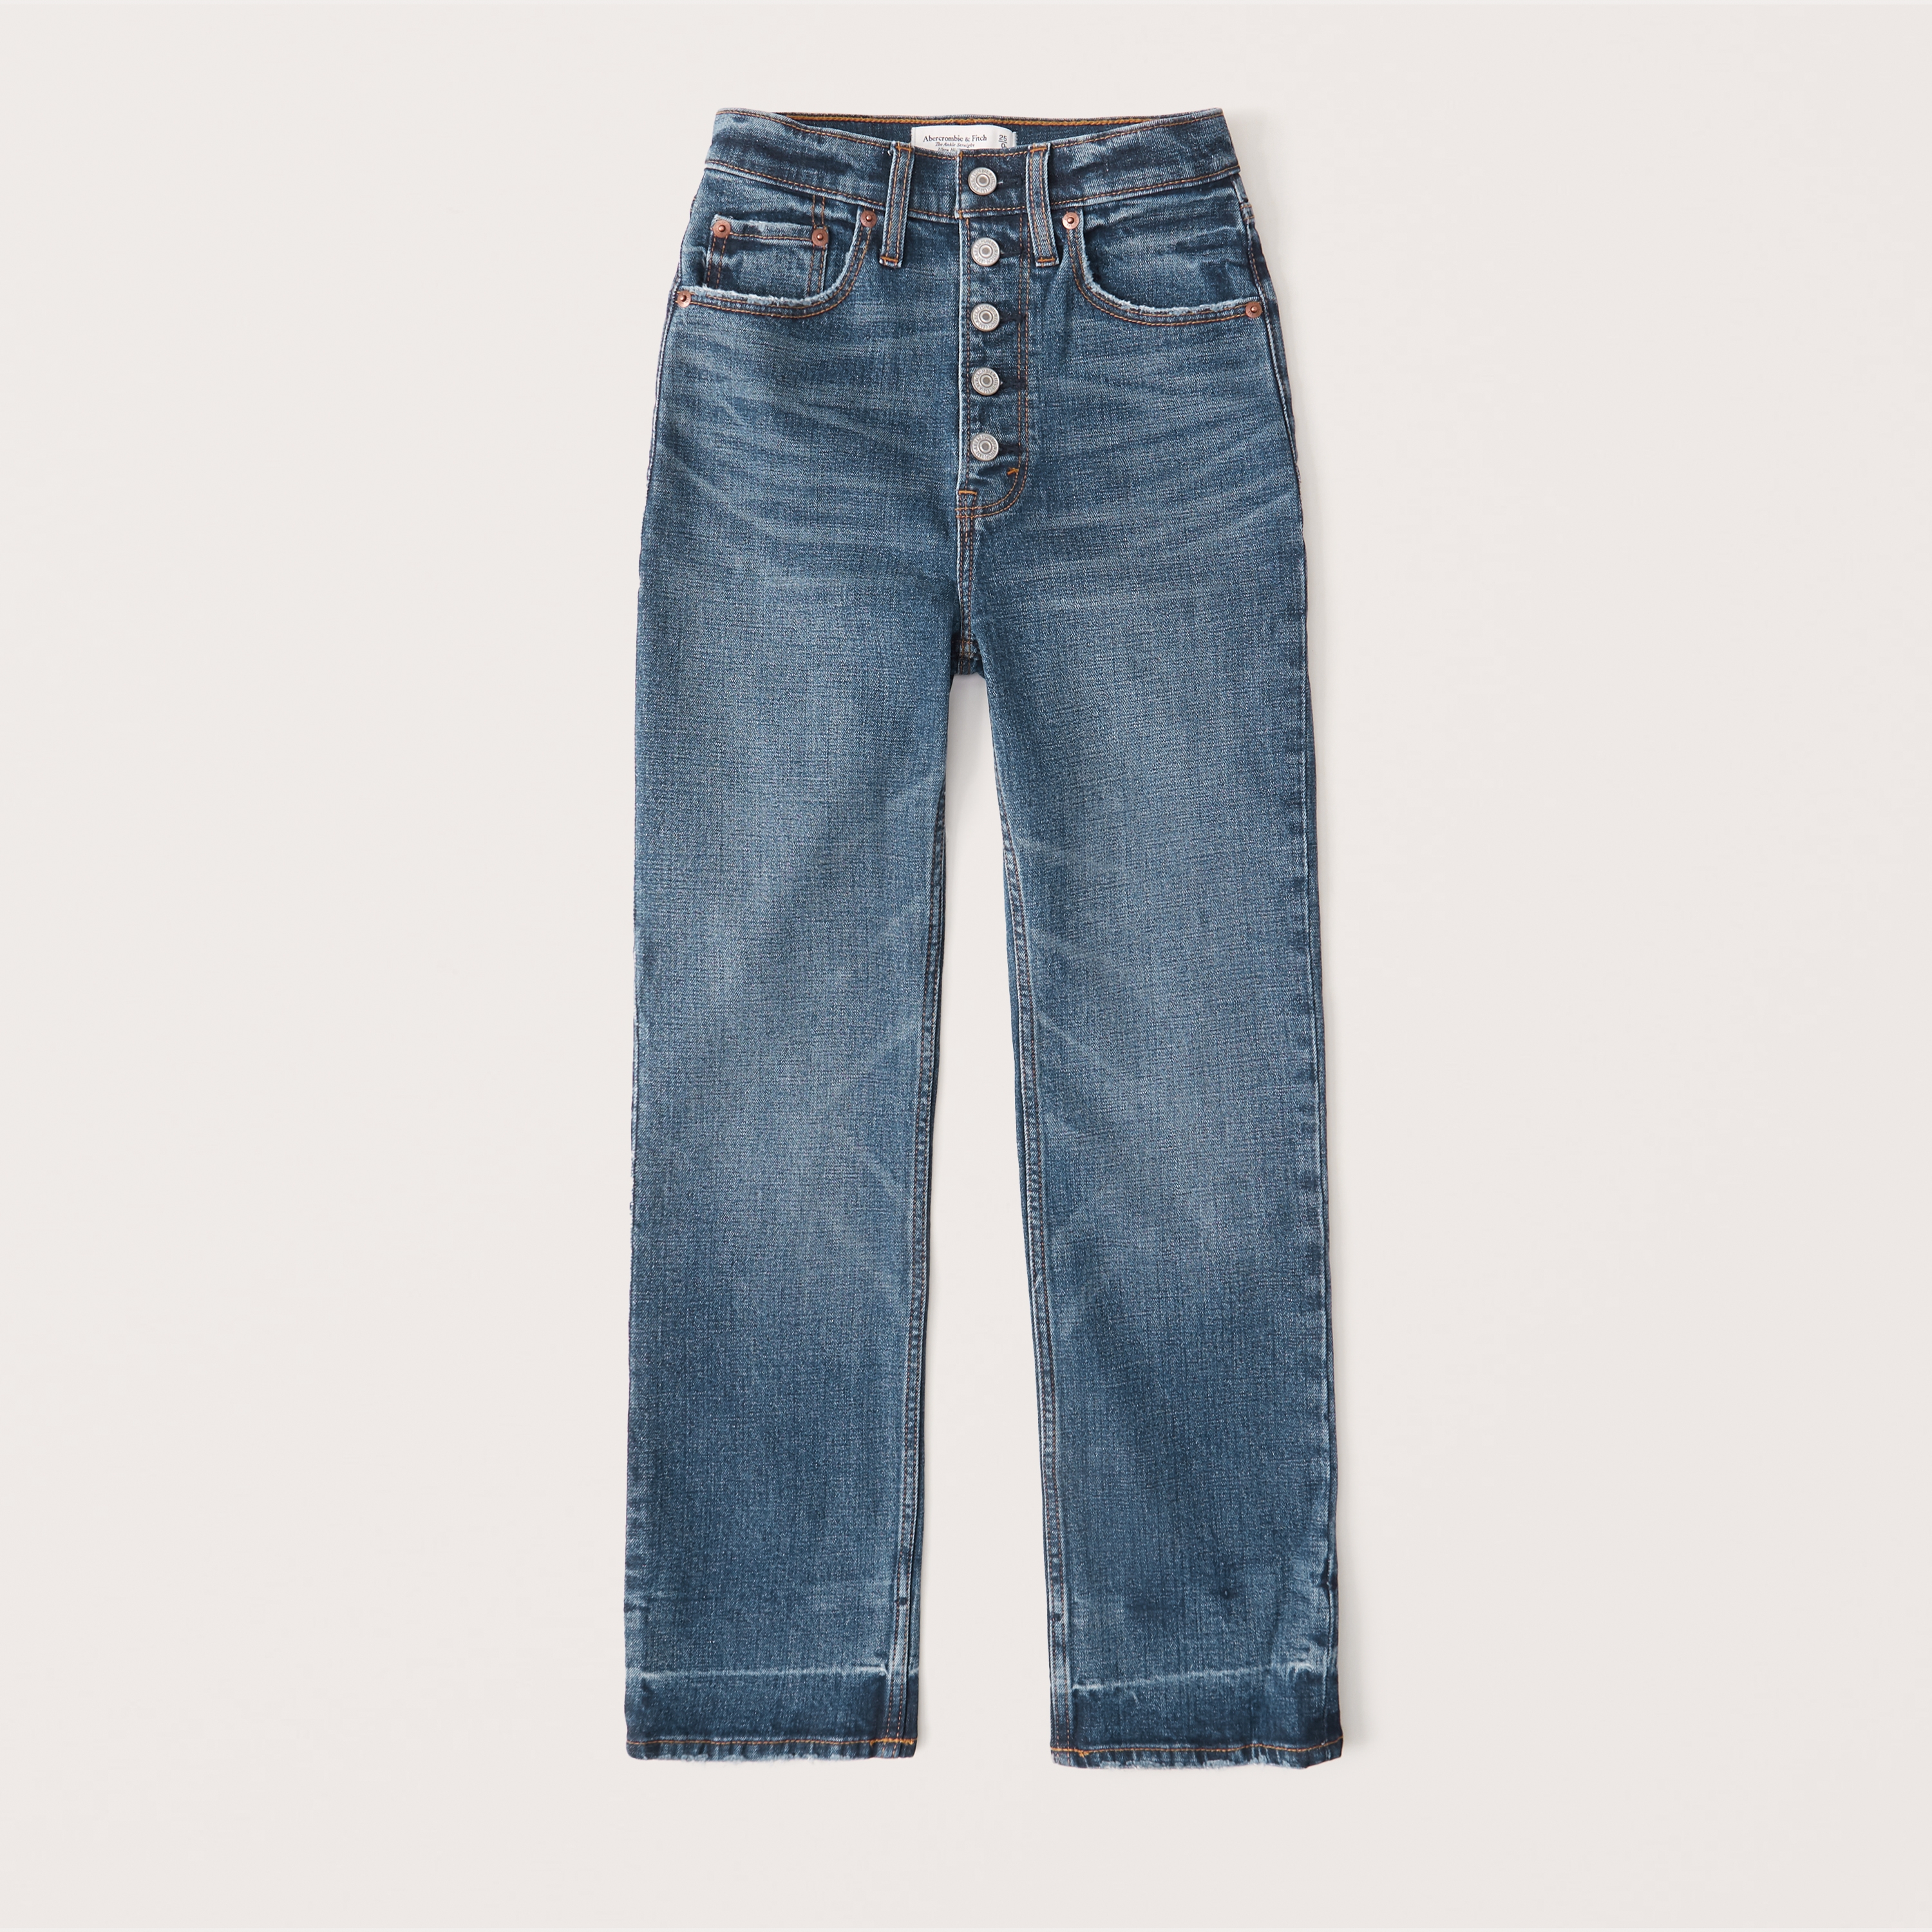 abercrombie & fitch straight jeans